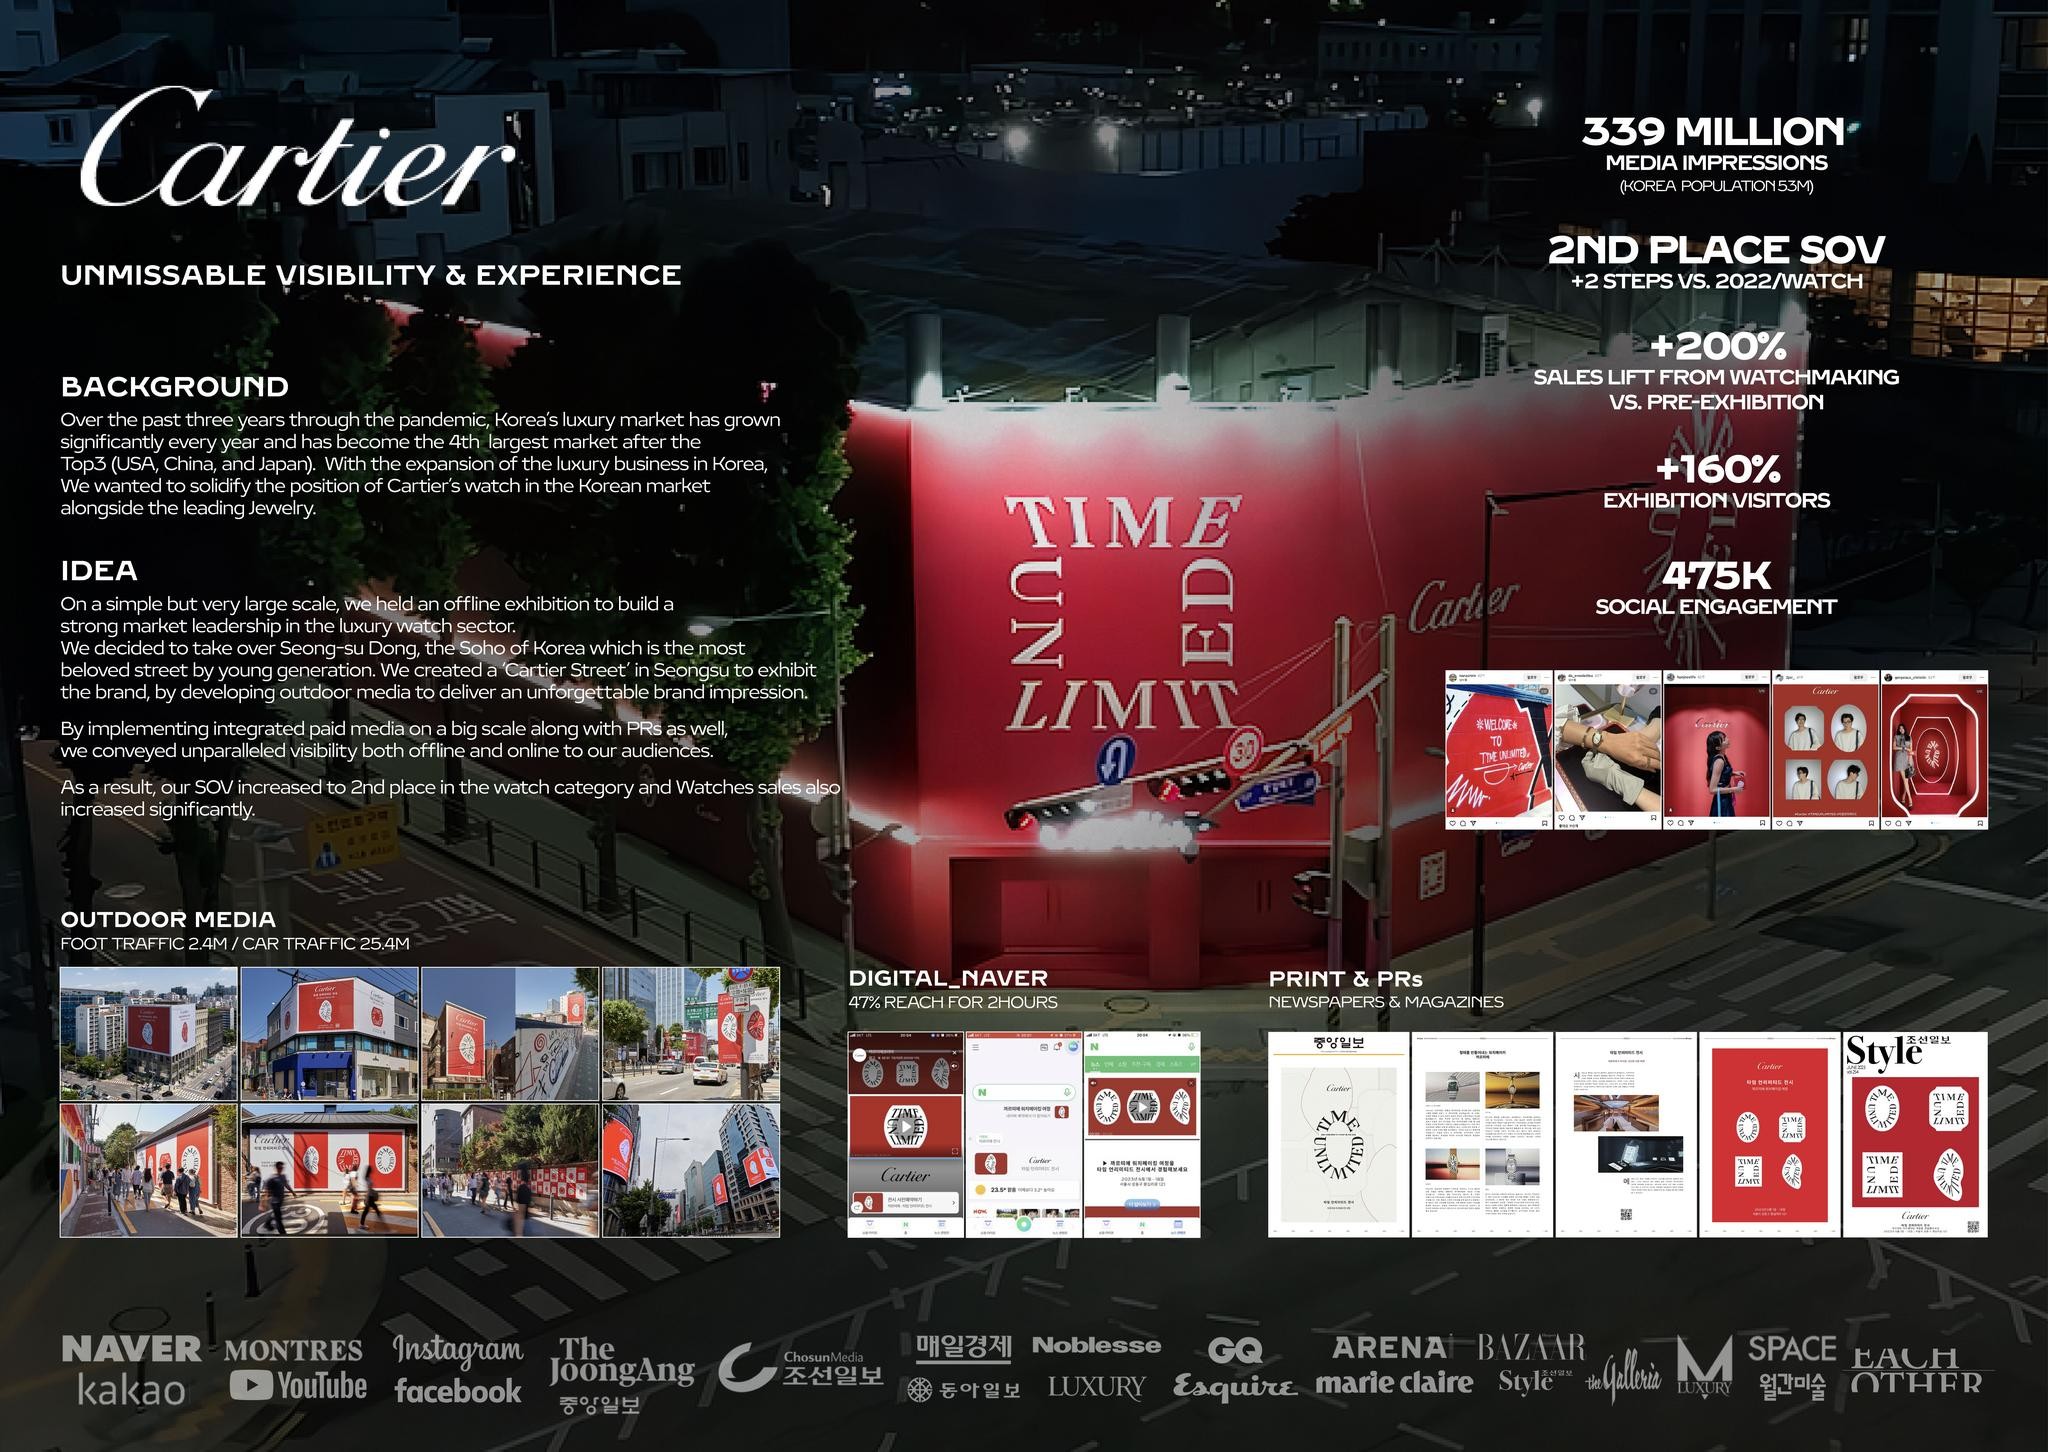 CARTIER TIME UNLIMITED